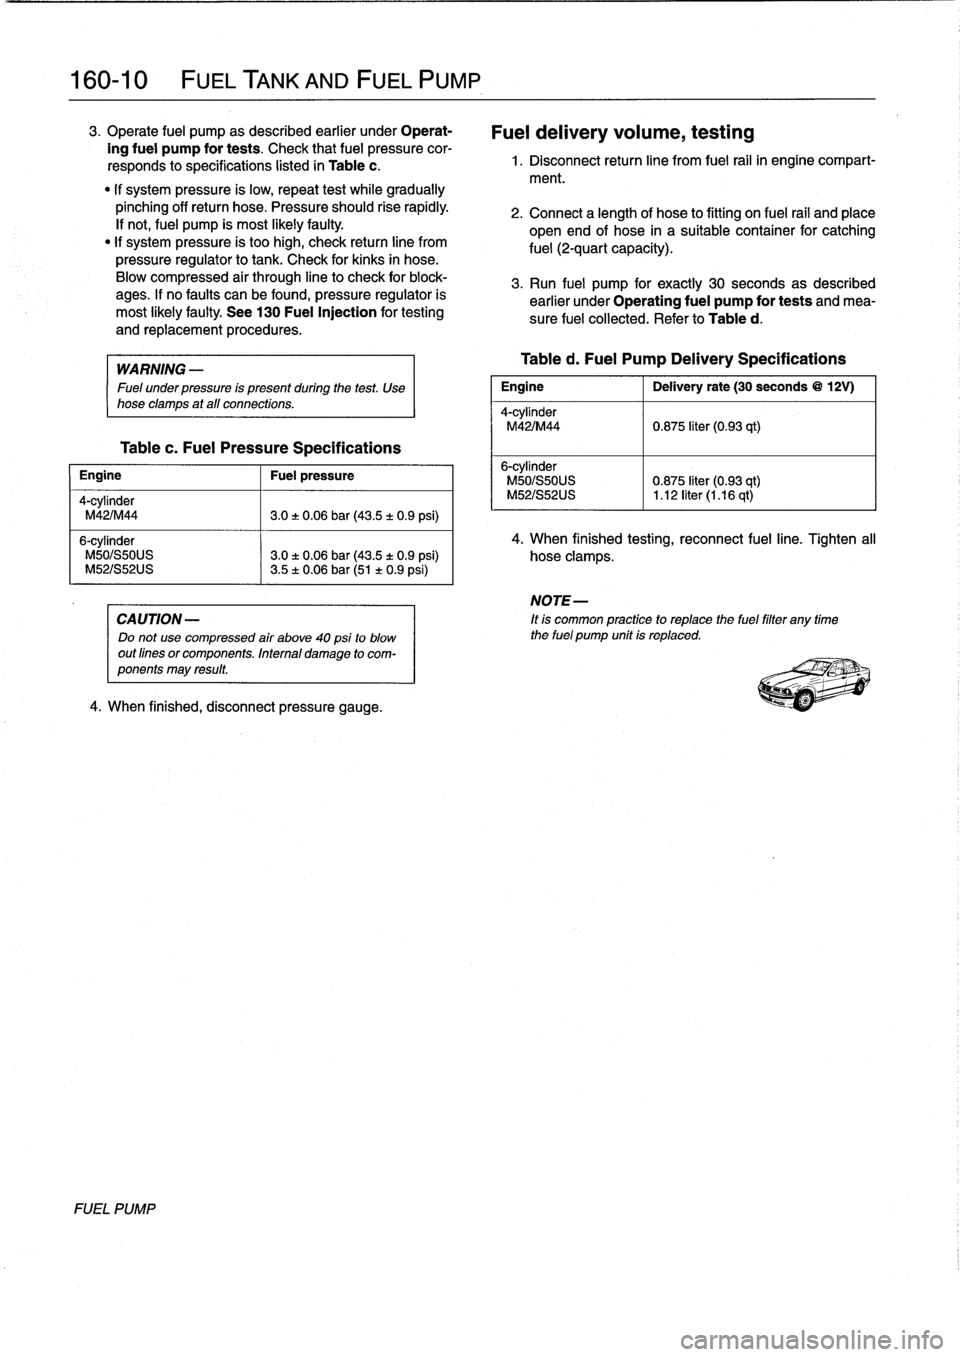 BMW 328i 1997 E36 Workshop Manual 
160-
1
0

	

FUEL
TANK
AND
FUEL
PUMP

3
.
Operate
fuel
pump
as
described
earlier
under
Operat-

ing
fuel
pump
for
tests
.
Check
that
fuel
pressure
cor-

responds
to
specifications
listed
in
Table
c
.